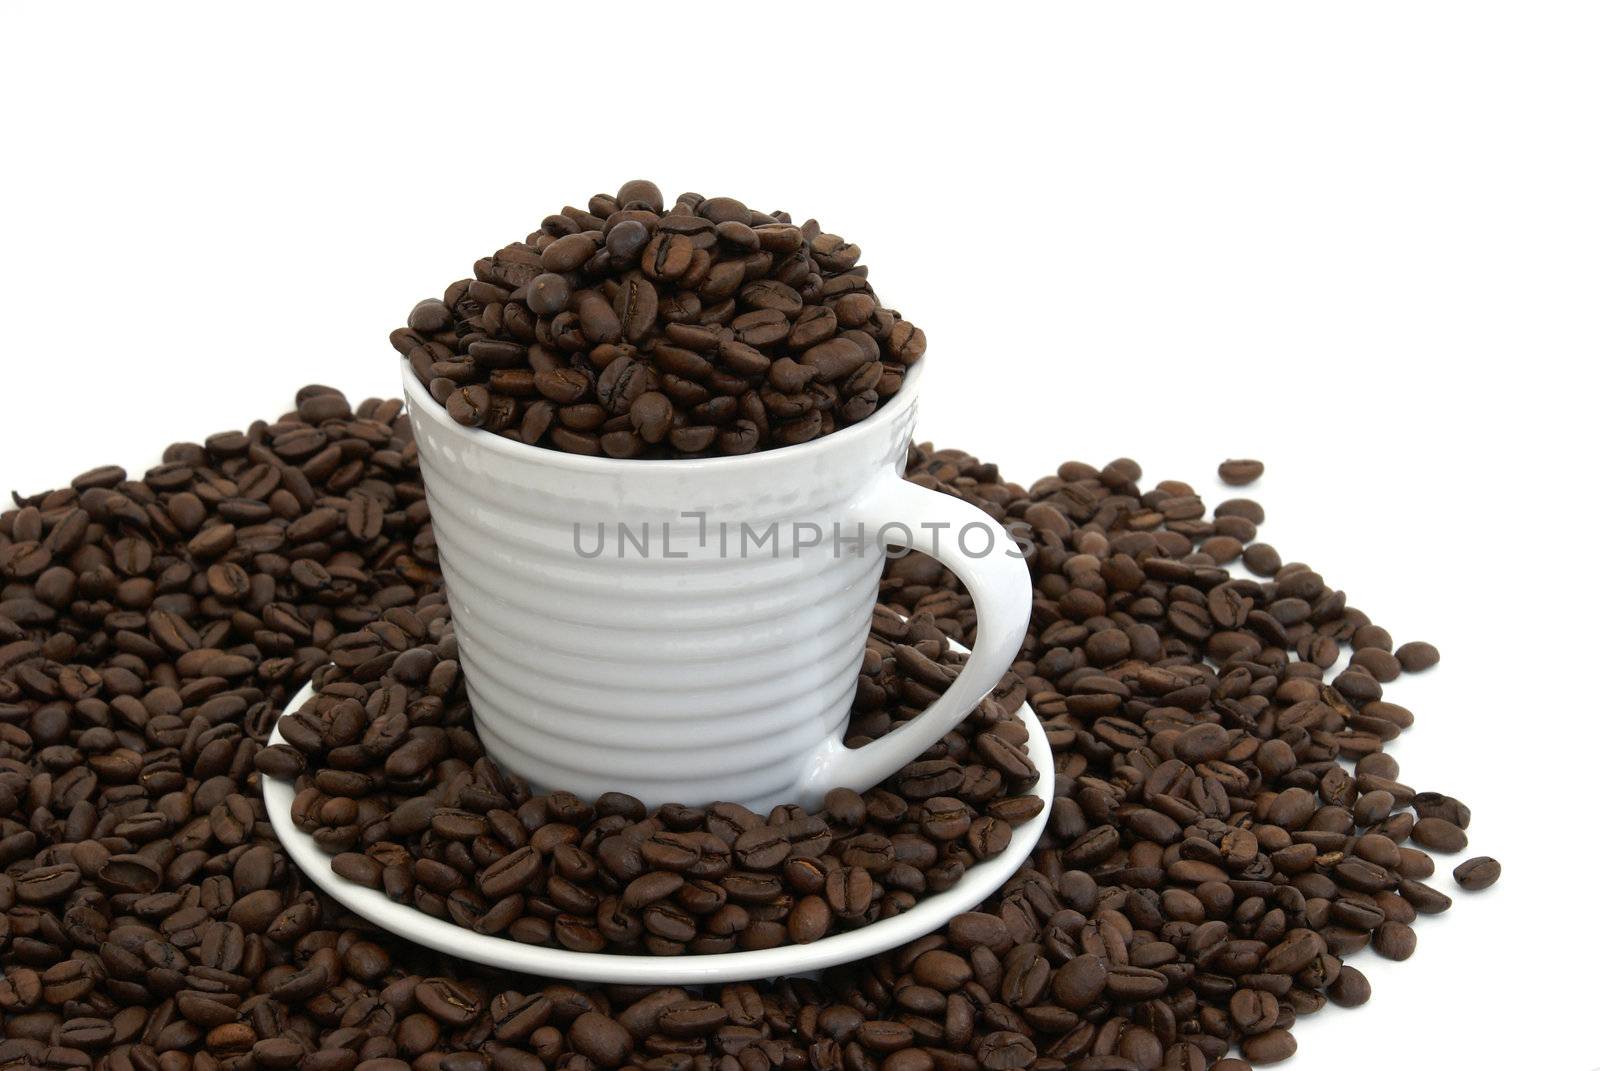 A cup and saucer full of fresh coffee beans.